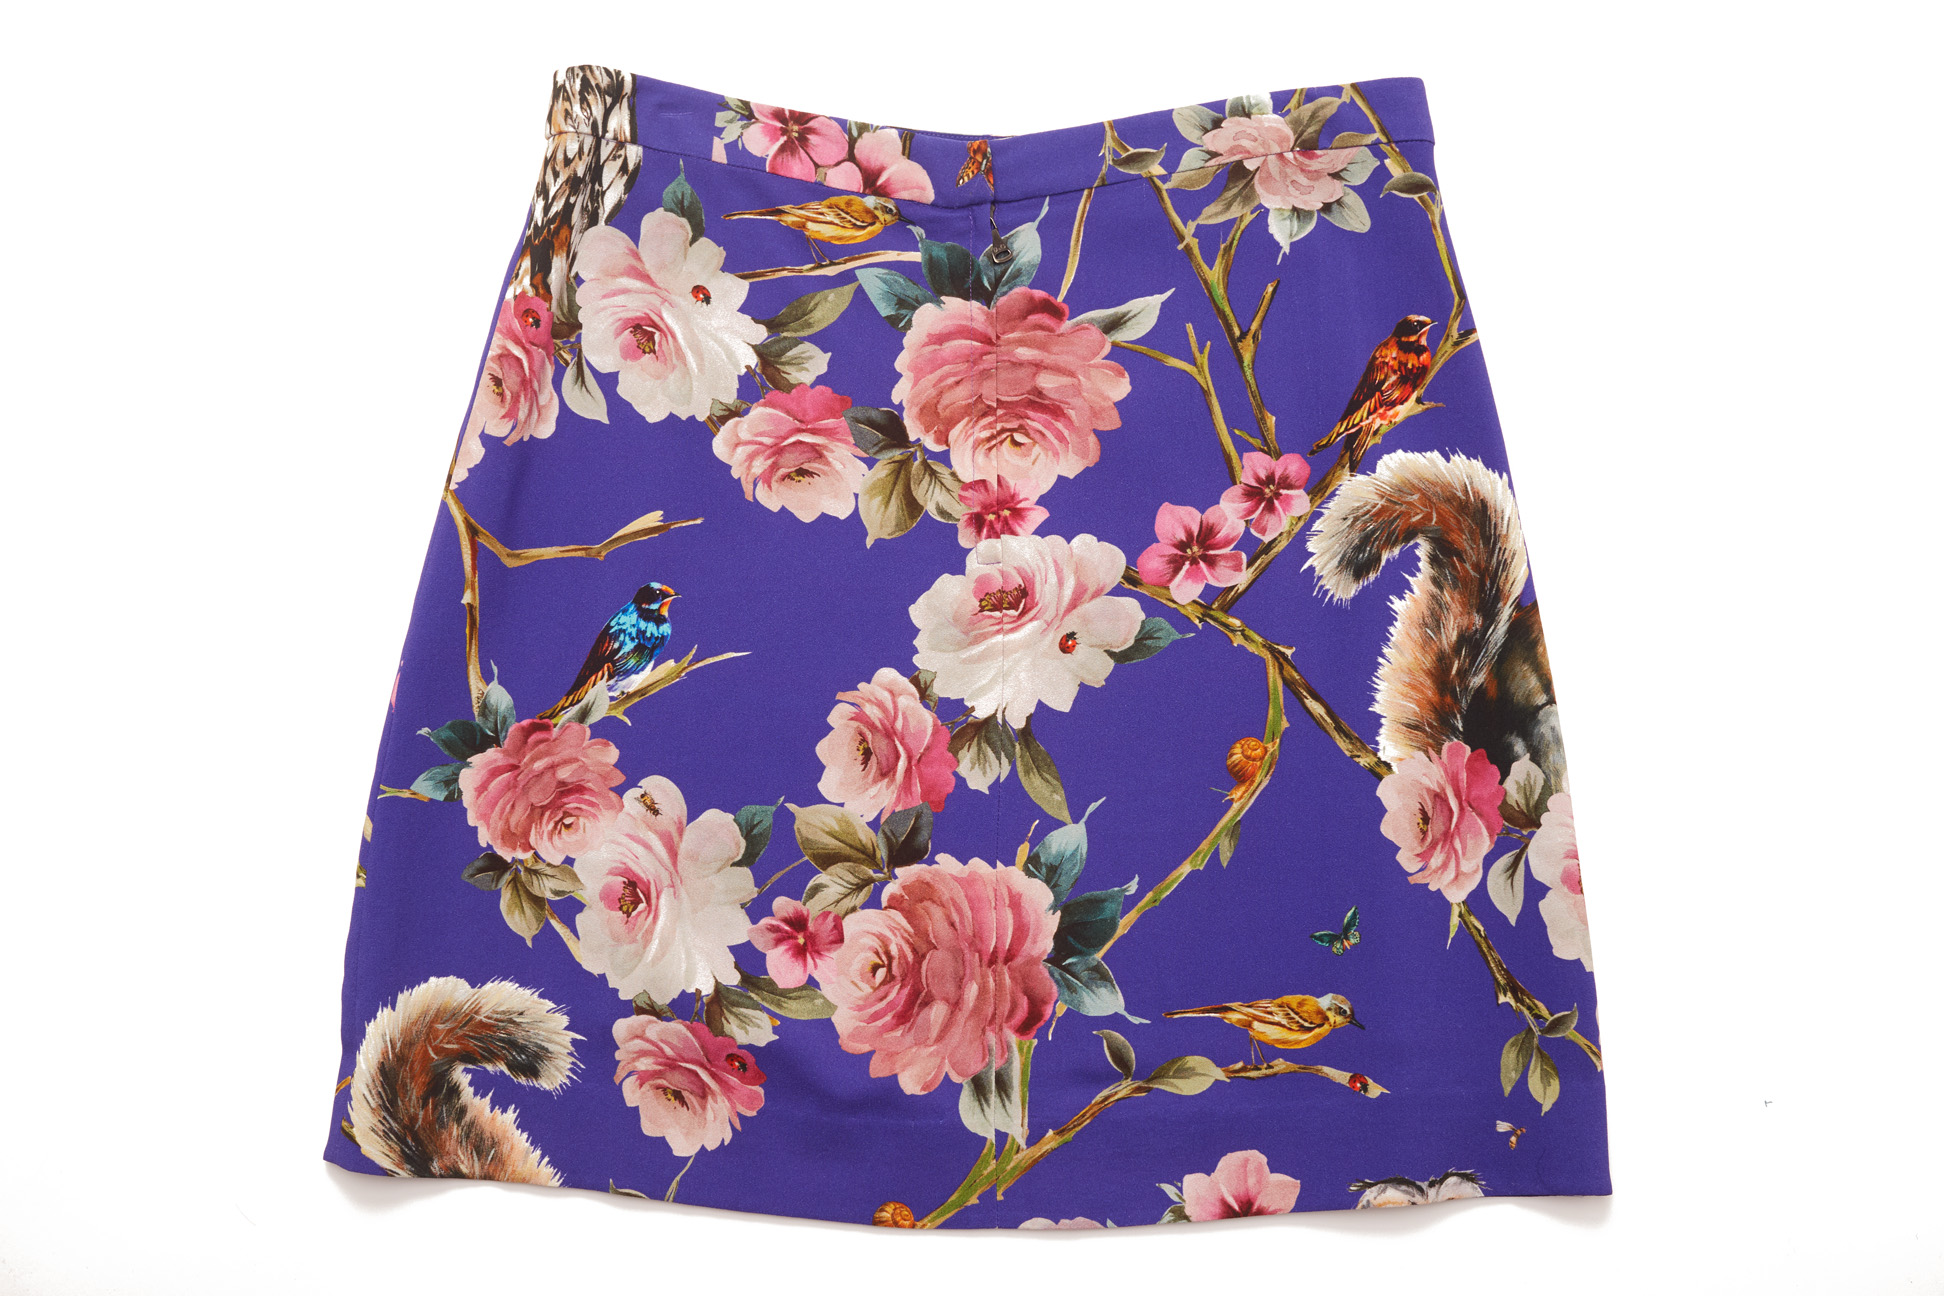 A DOLCE & GABBANA 'ENCHANTED FOREST' SKIRT - Image 2 of 2